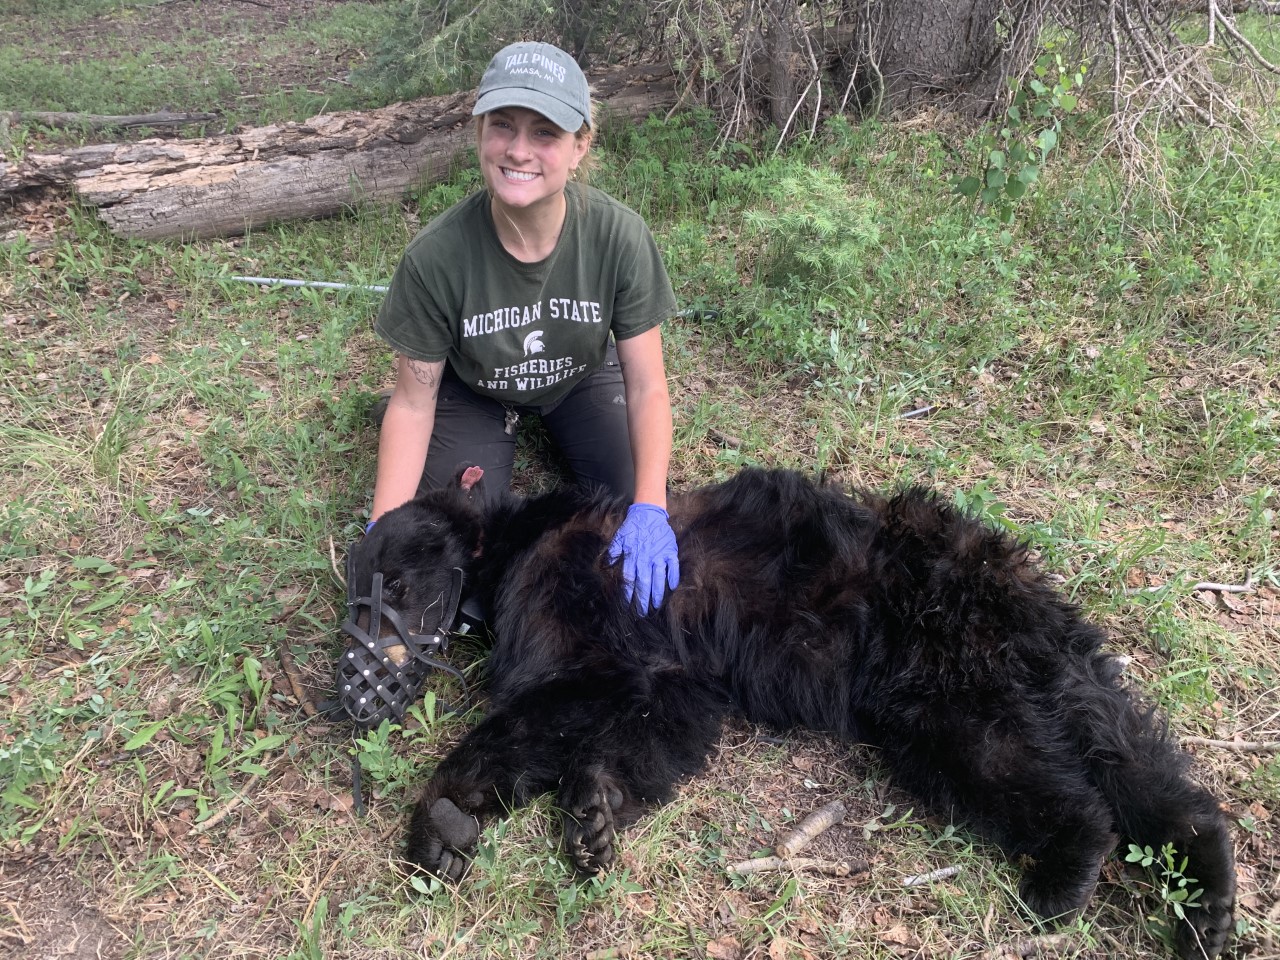 Lauren Emerick with a bear for a research project.